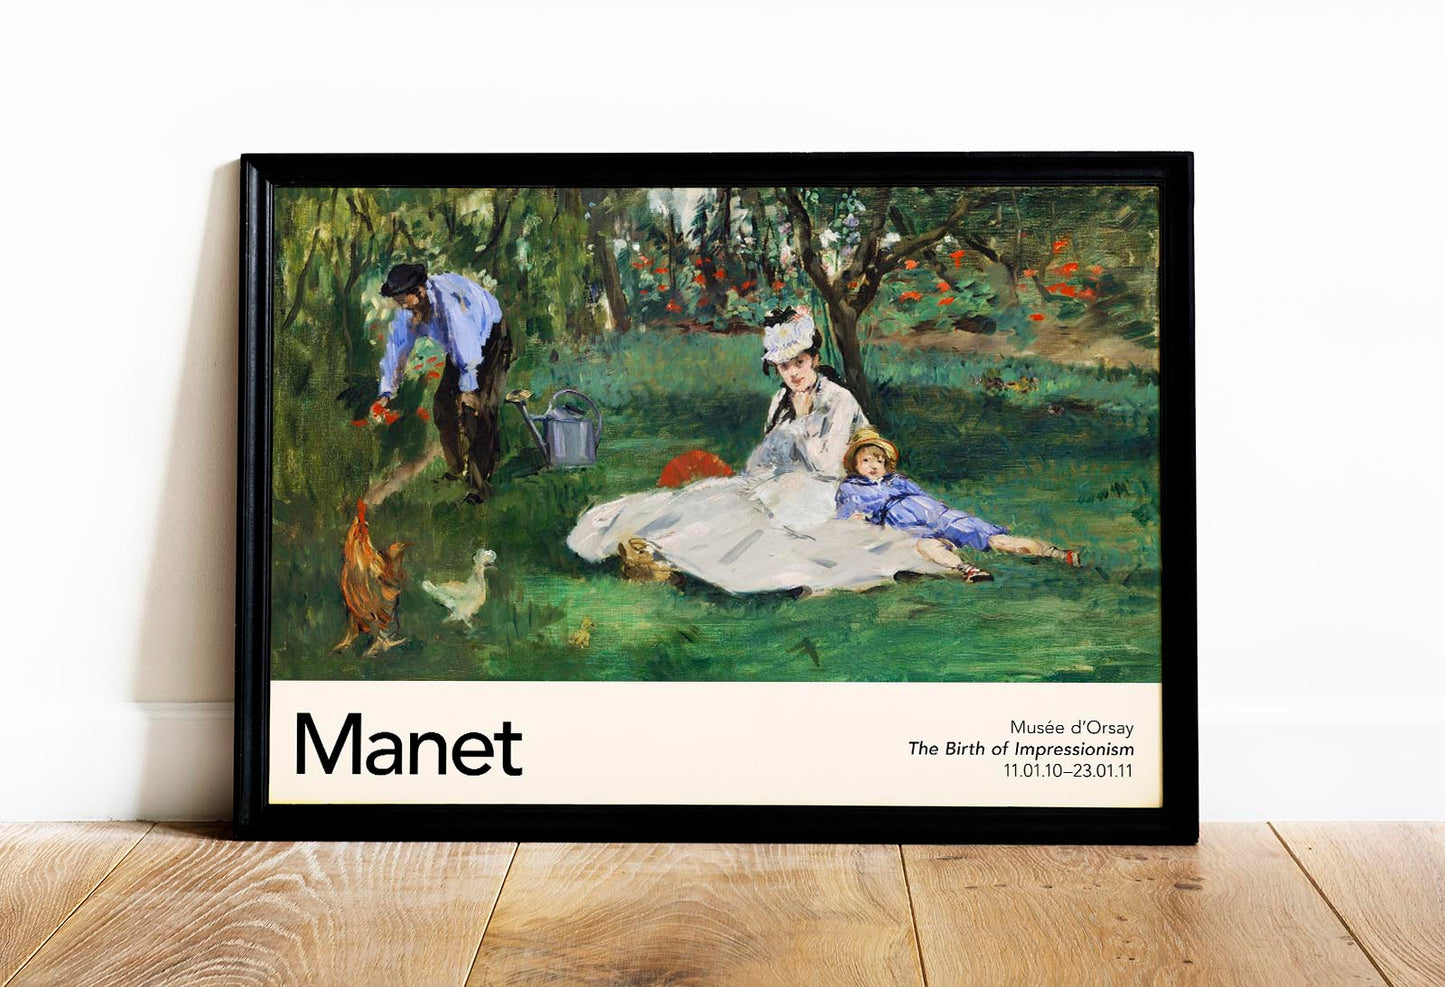 The Monet Family by Manet Exhibition Poster